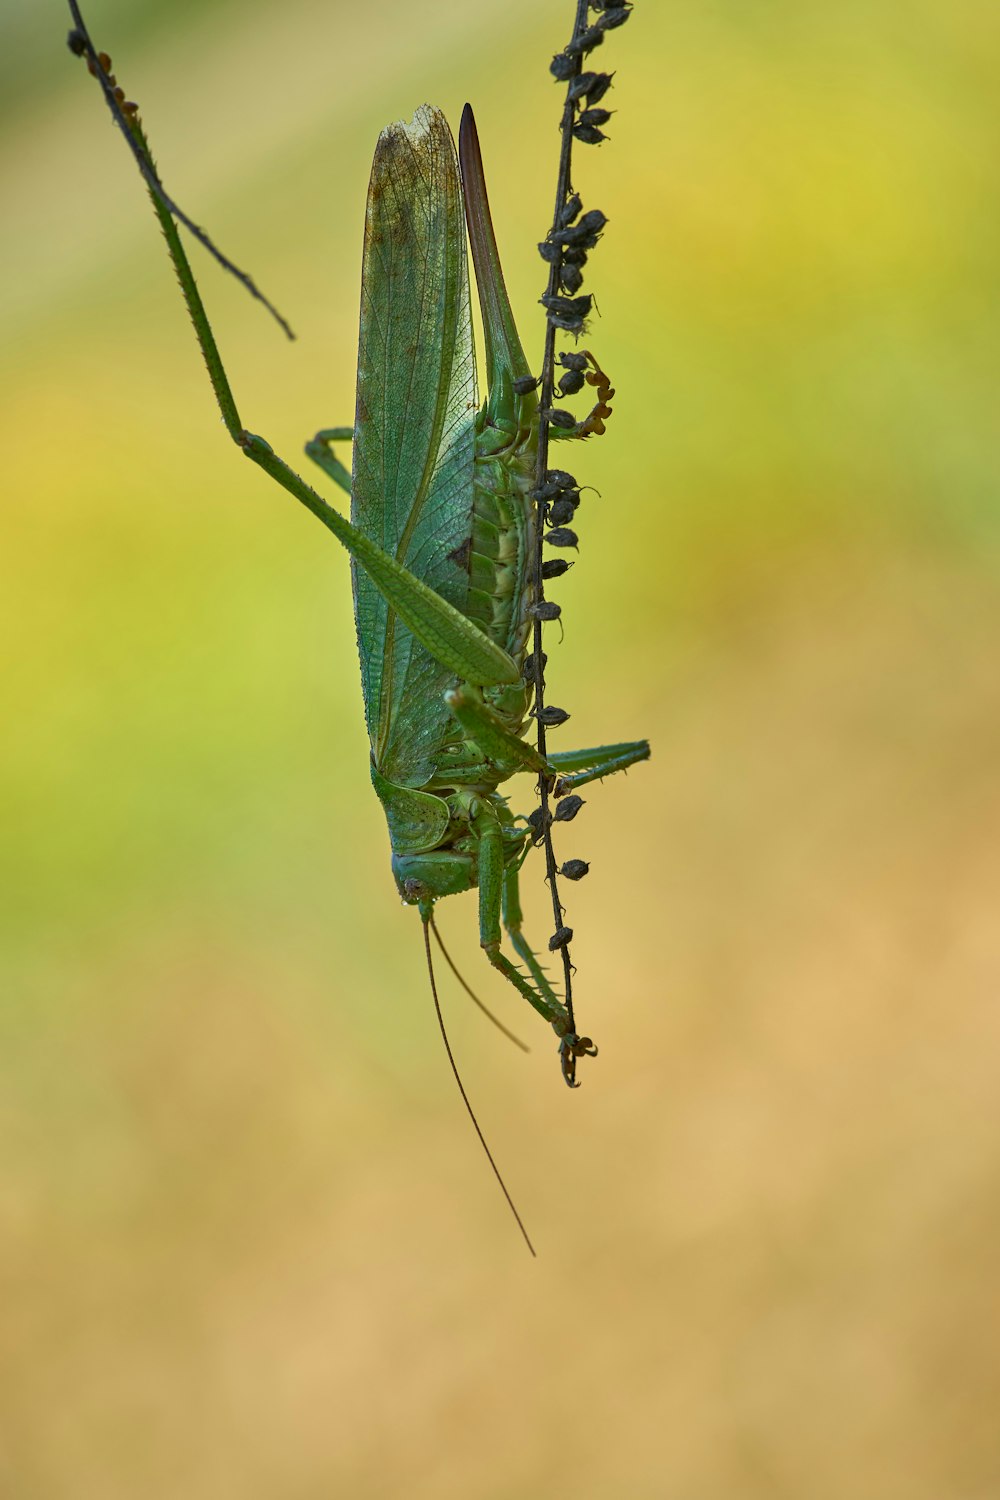 green grasshopper on brown stem in close up photography during daytime